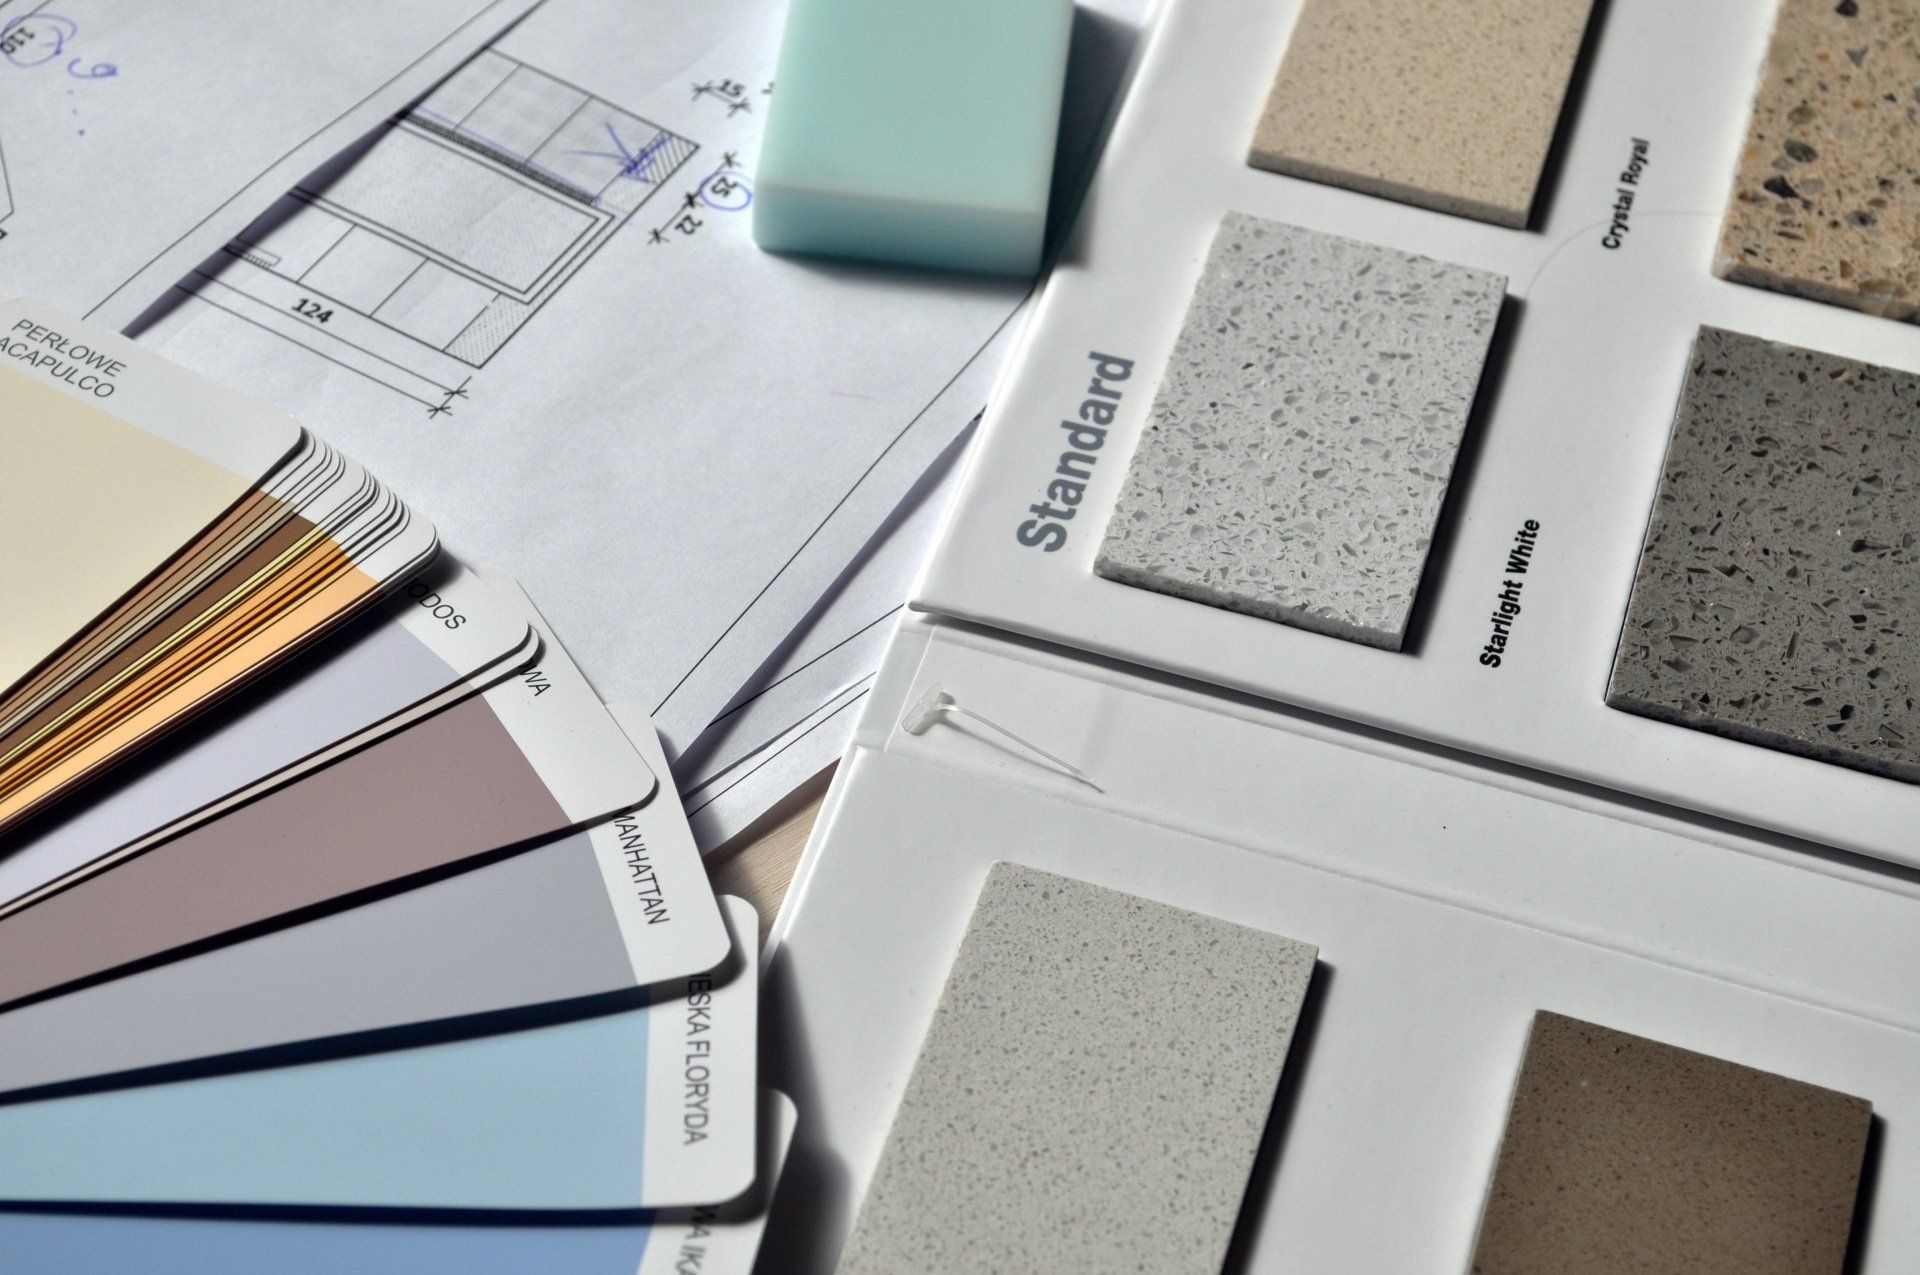 Picture of paint and tile samples.